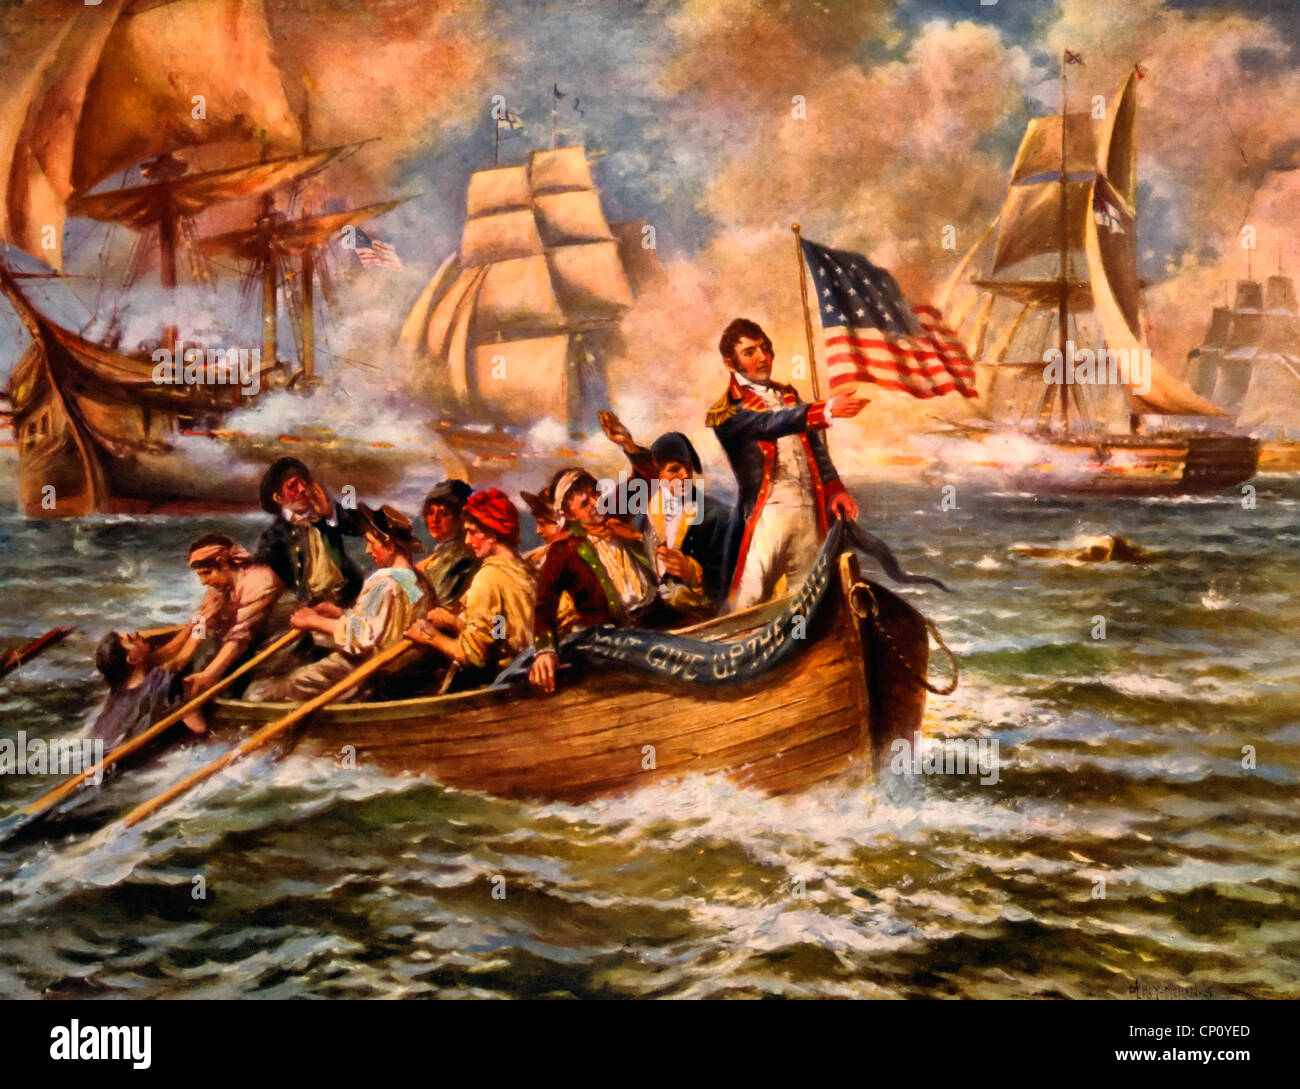 Battle of Lake Erie - Oliver Hazard Perry standing on front of small boat after abandoning his flagship, the Lawrence, 1813 Stock Photo